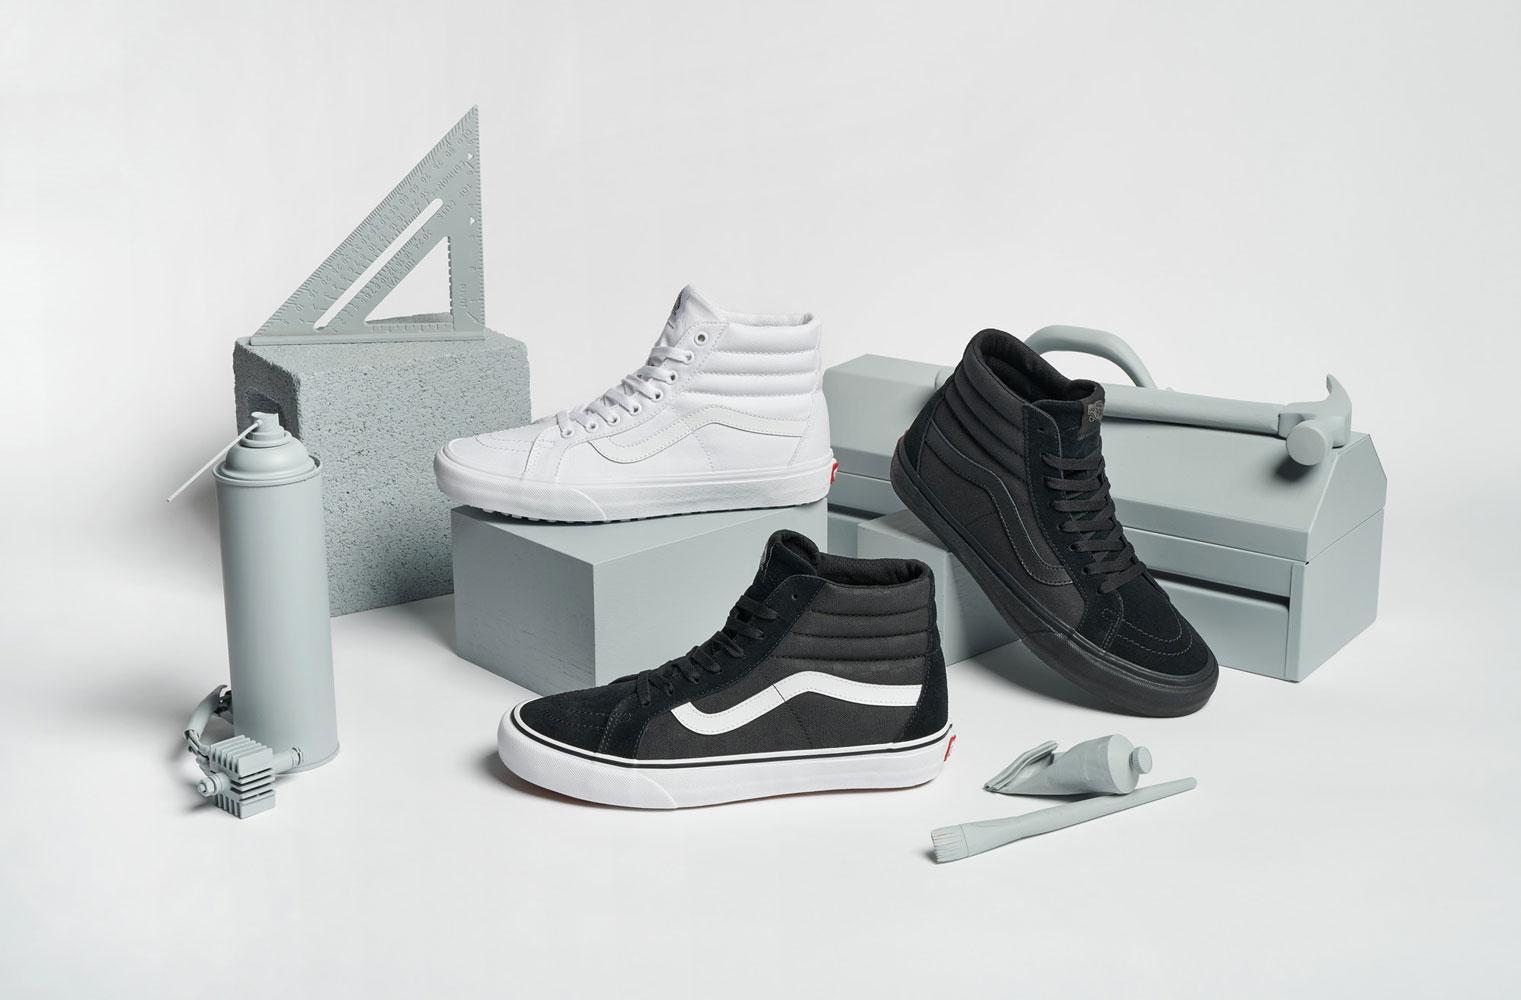 Vans Made for the Makers 2.0 collection